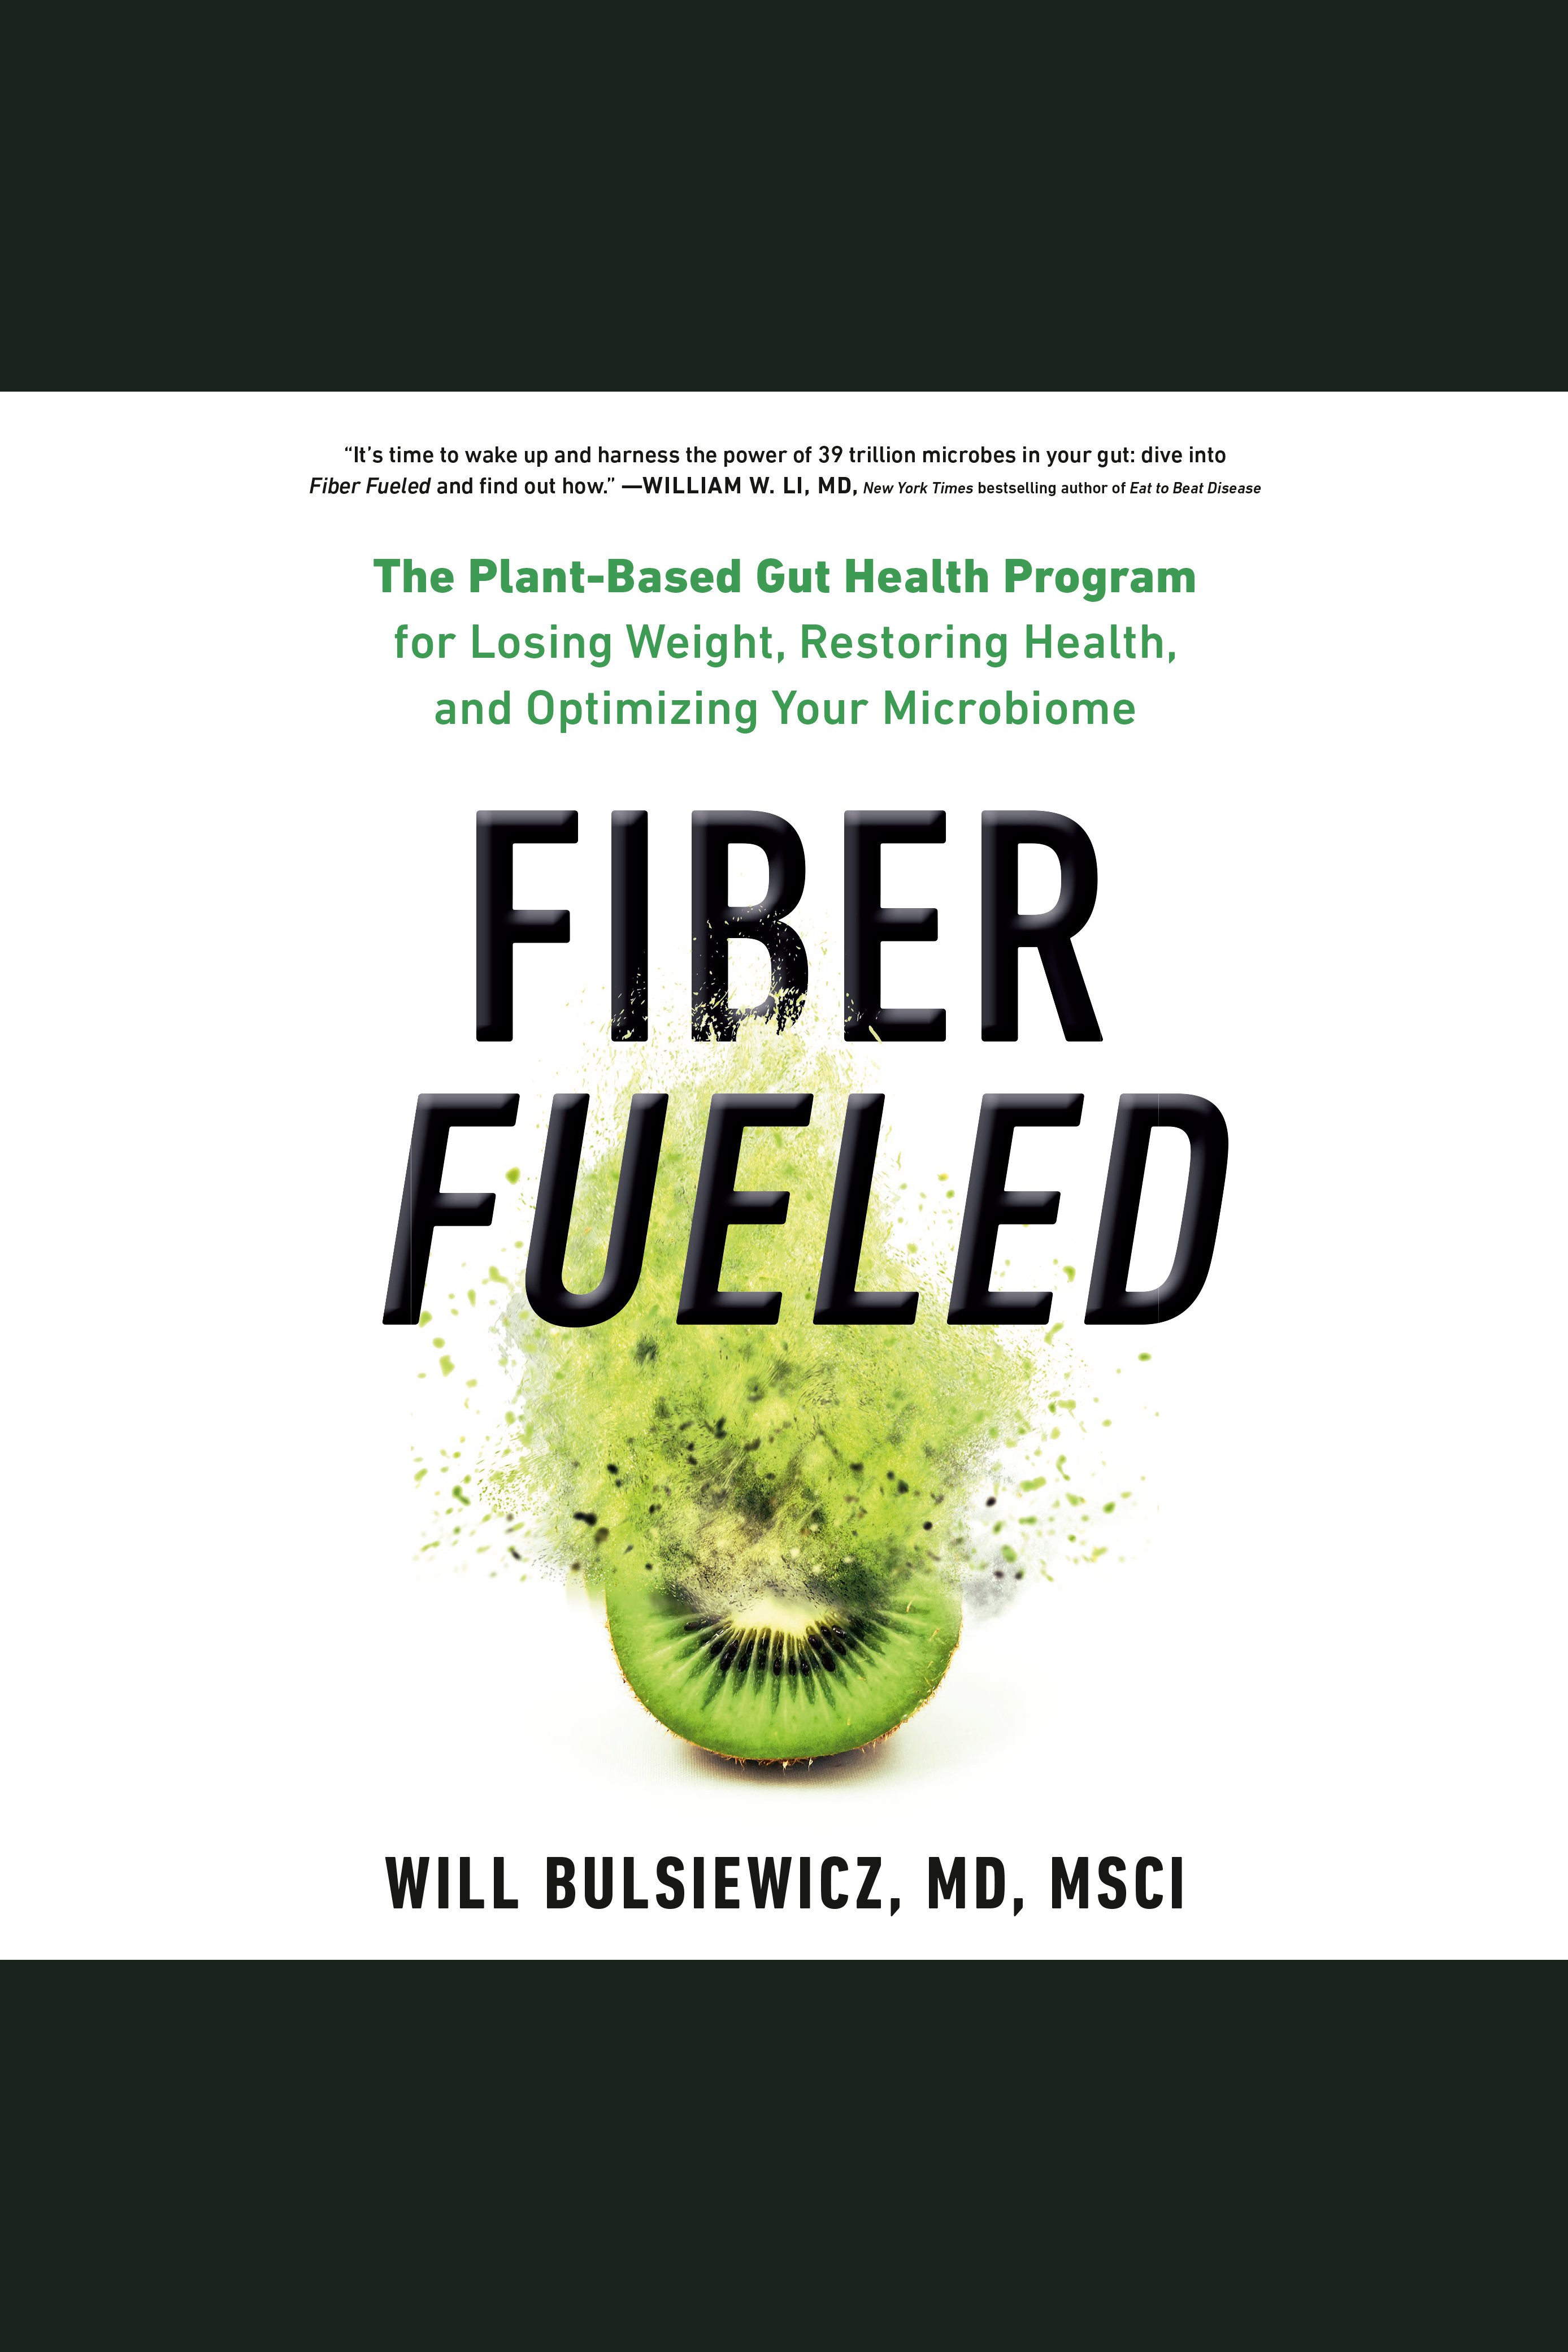 Fiber Fueled The Plant-Based Gut Health Program for Losing Weight, Restoring Your Health, and Optimizing Your Microbiome